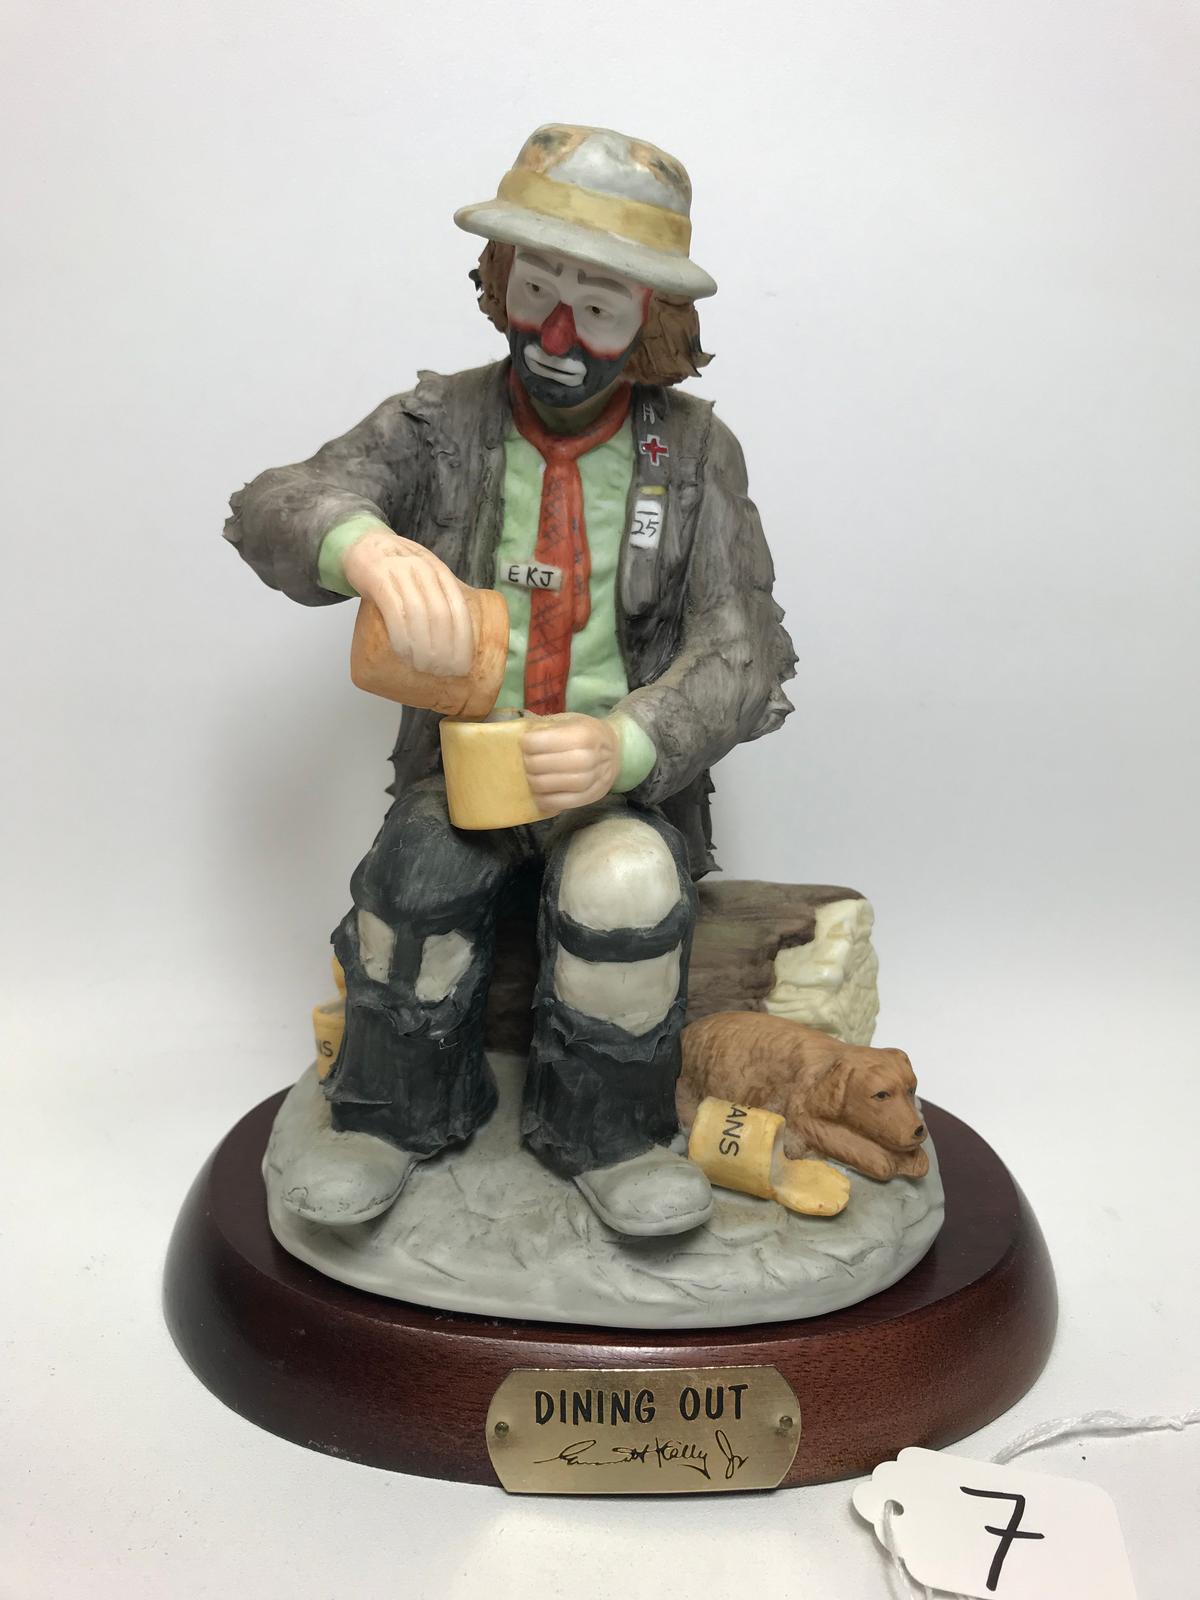 "Dining Out" 8"T.Clown Figurine From The Emmett Kelly, Jr. Signature Collection By Flambro